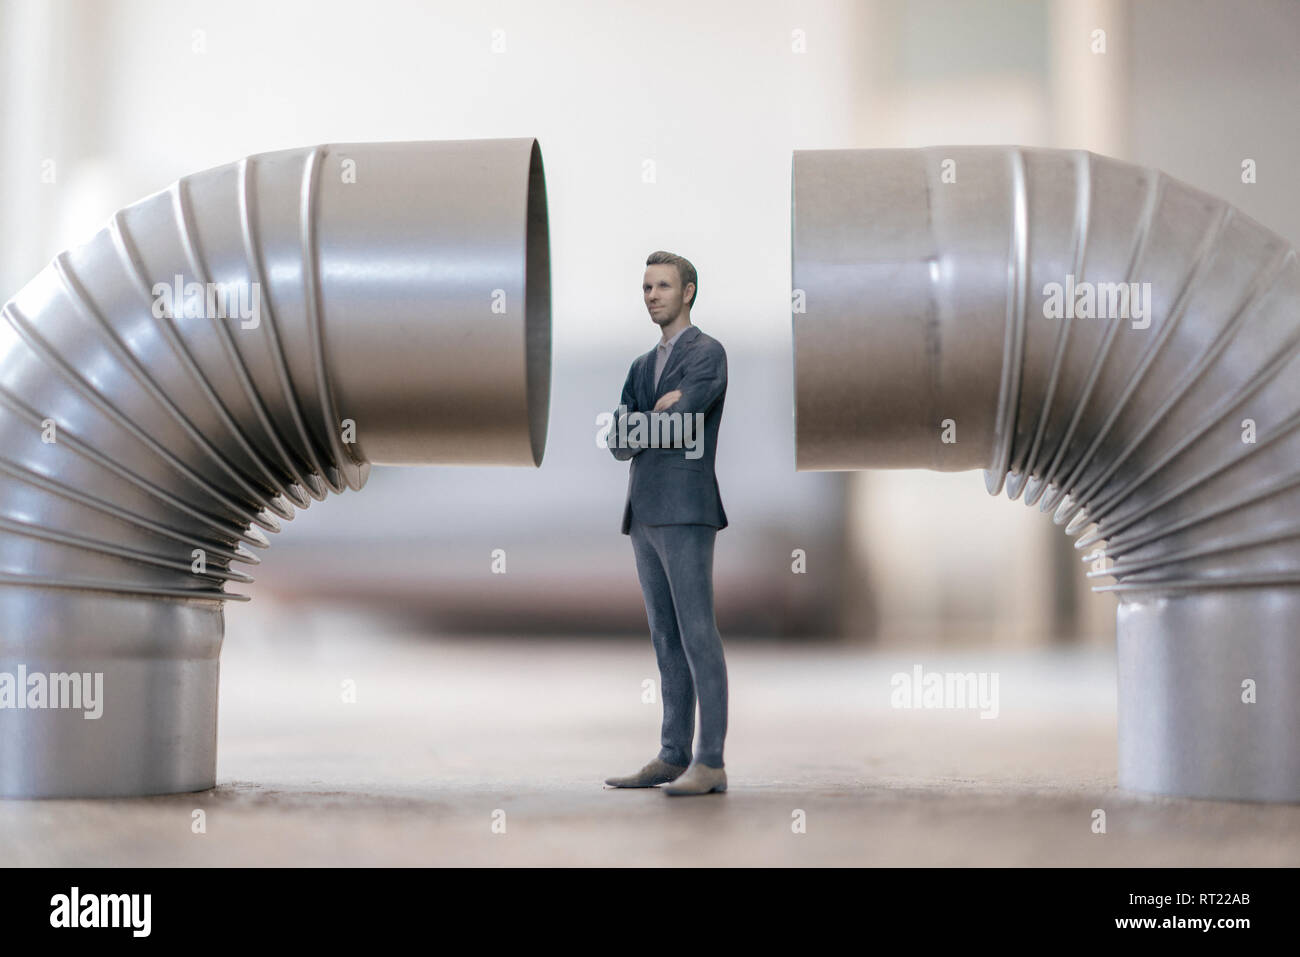 Businessman figurine standing between two stove pipes Stock Photo